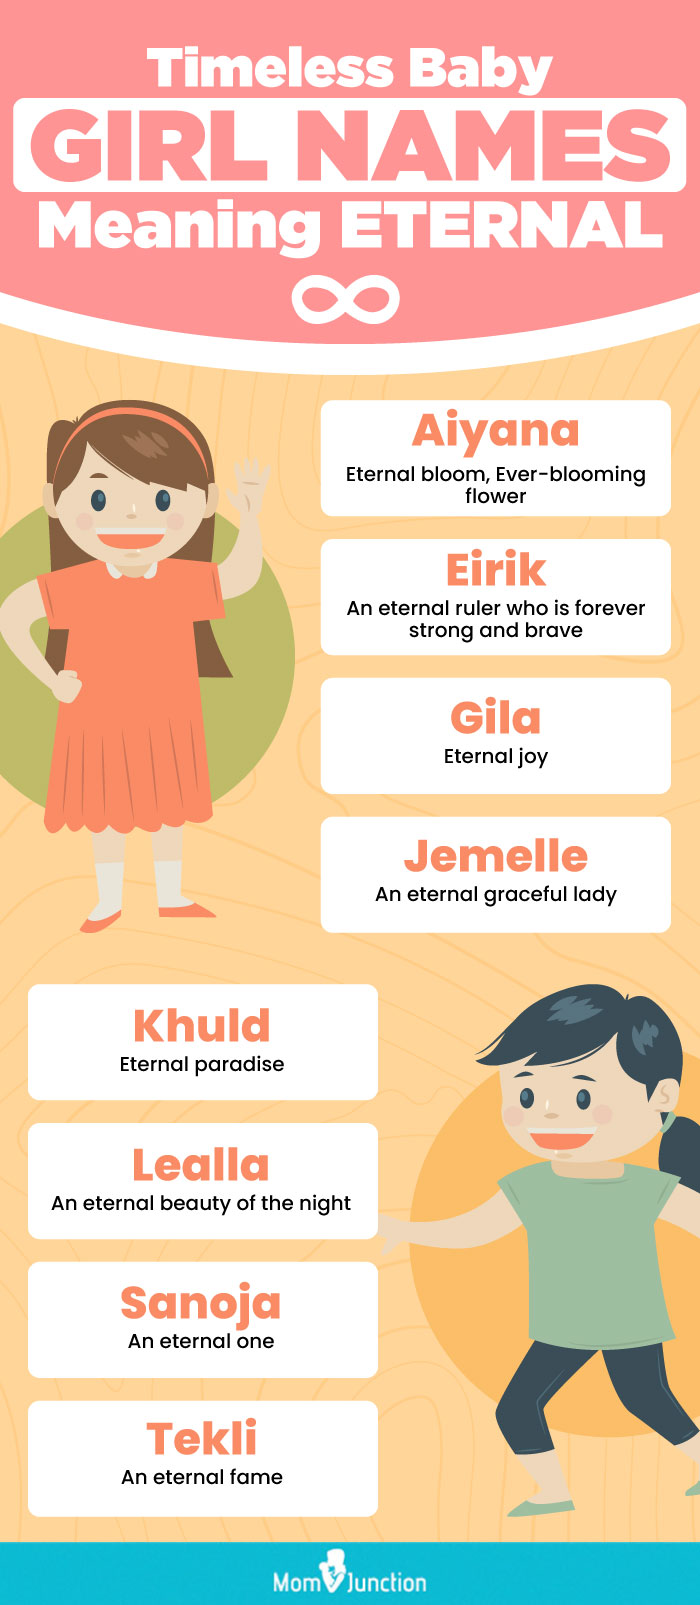 timeless baby girl names meaning eternal (infographic)